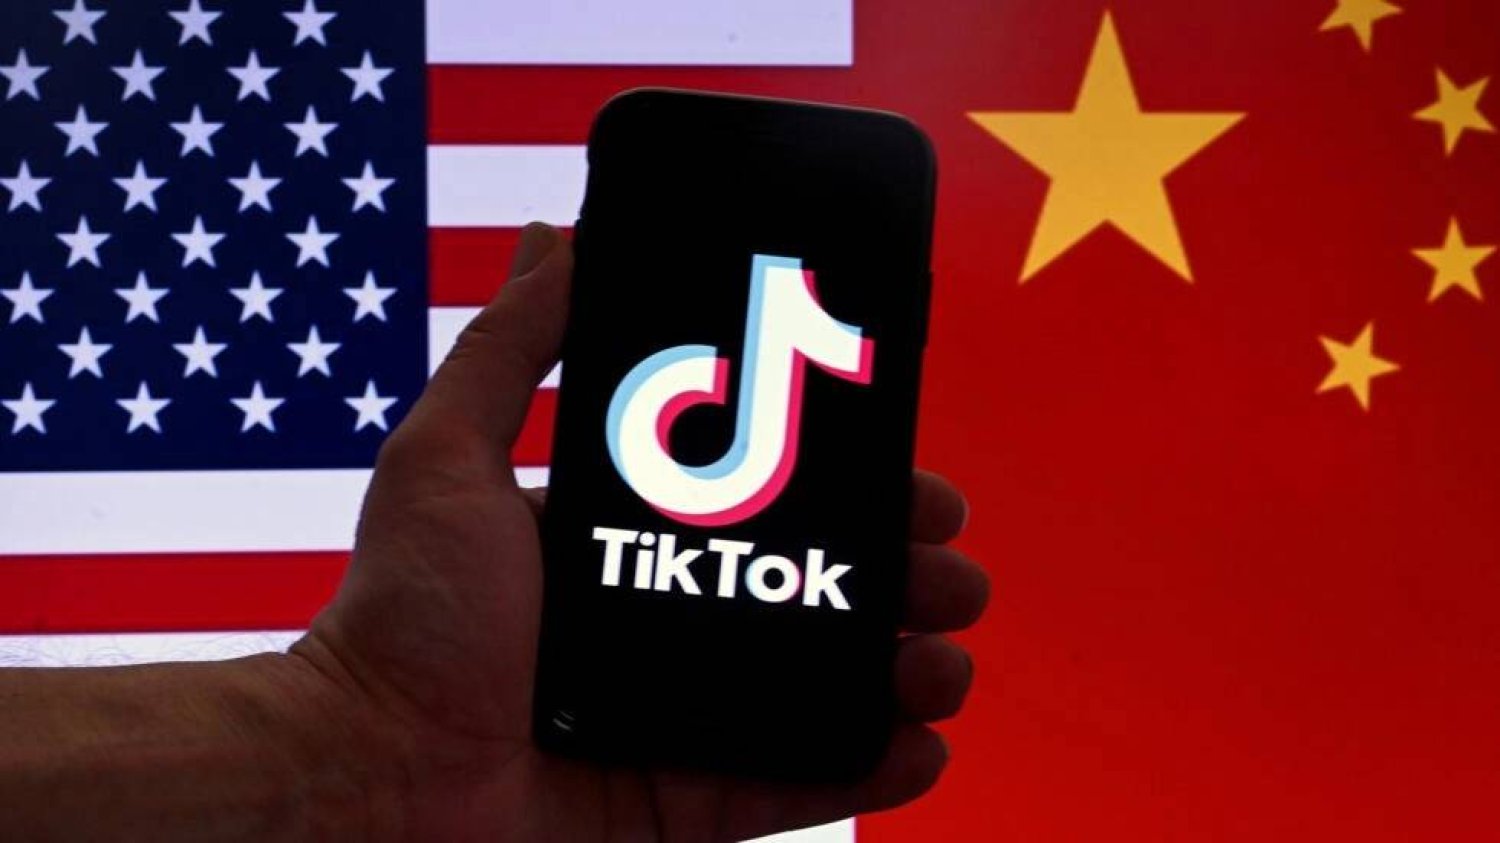 What Happens to TikTok? ByteDance May Close U.S. Operations Over Sale Dispute